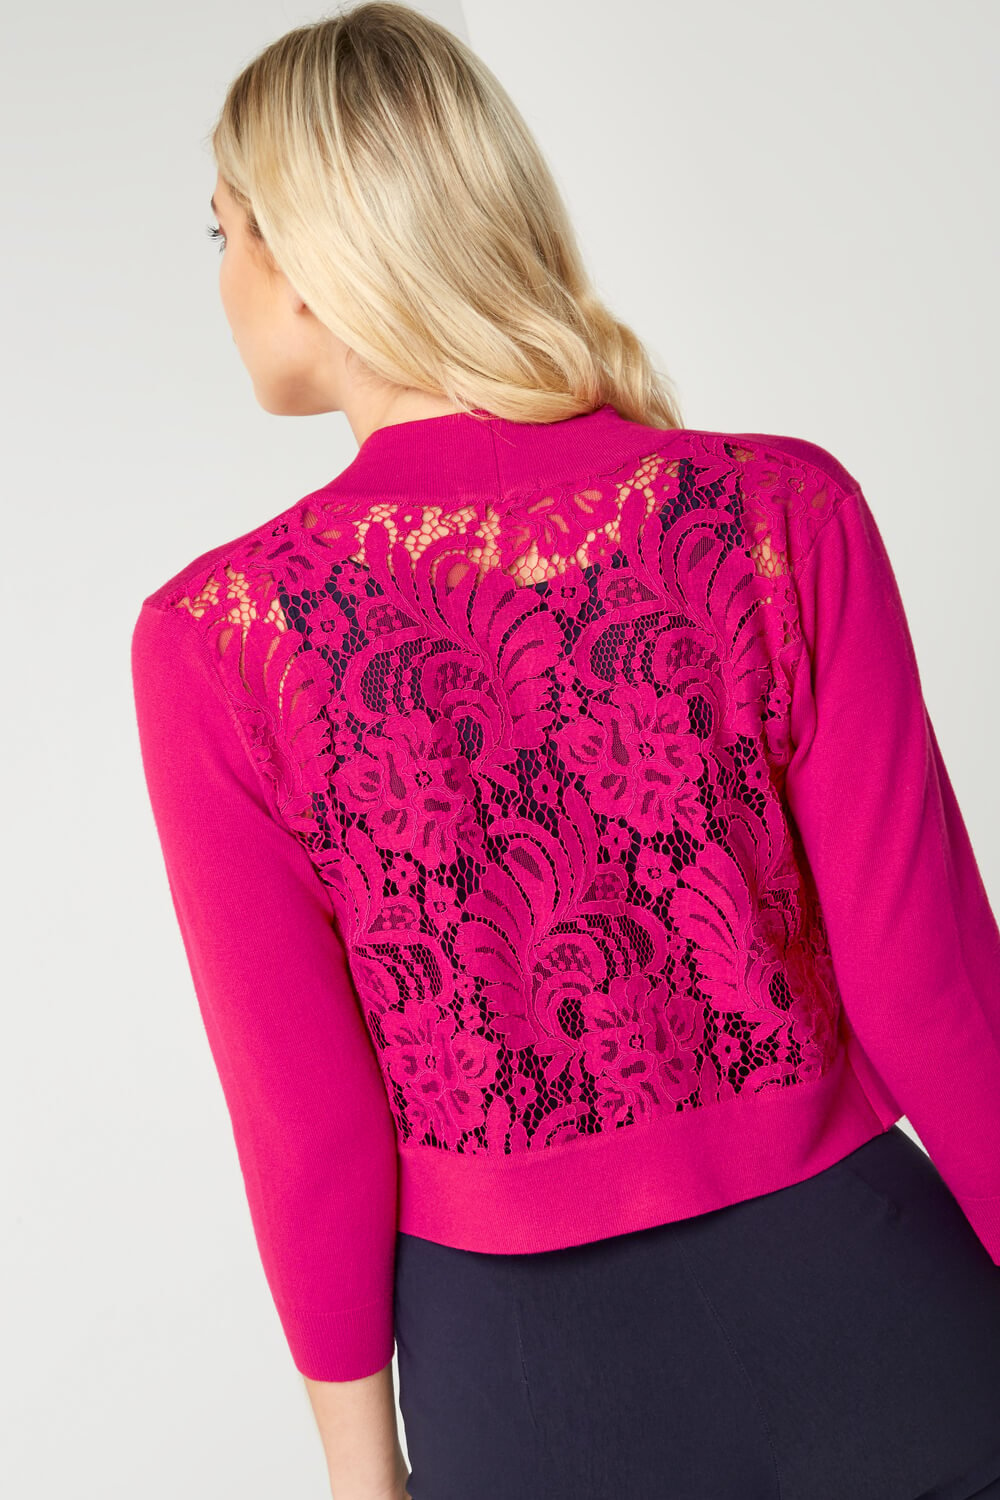 ORCHID Lace Back Shrug, Image 3 of 4